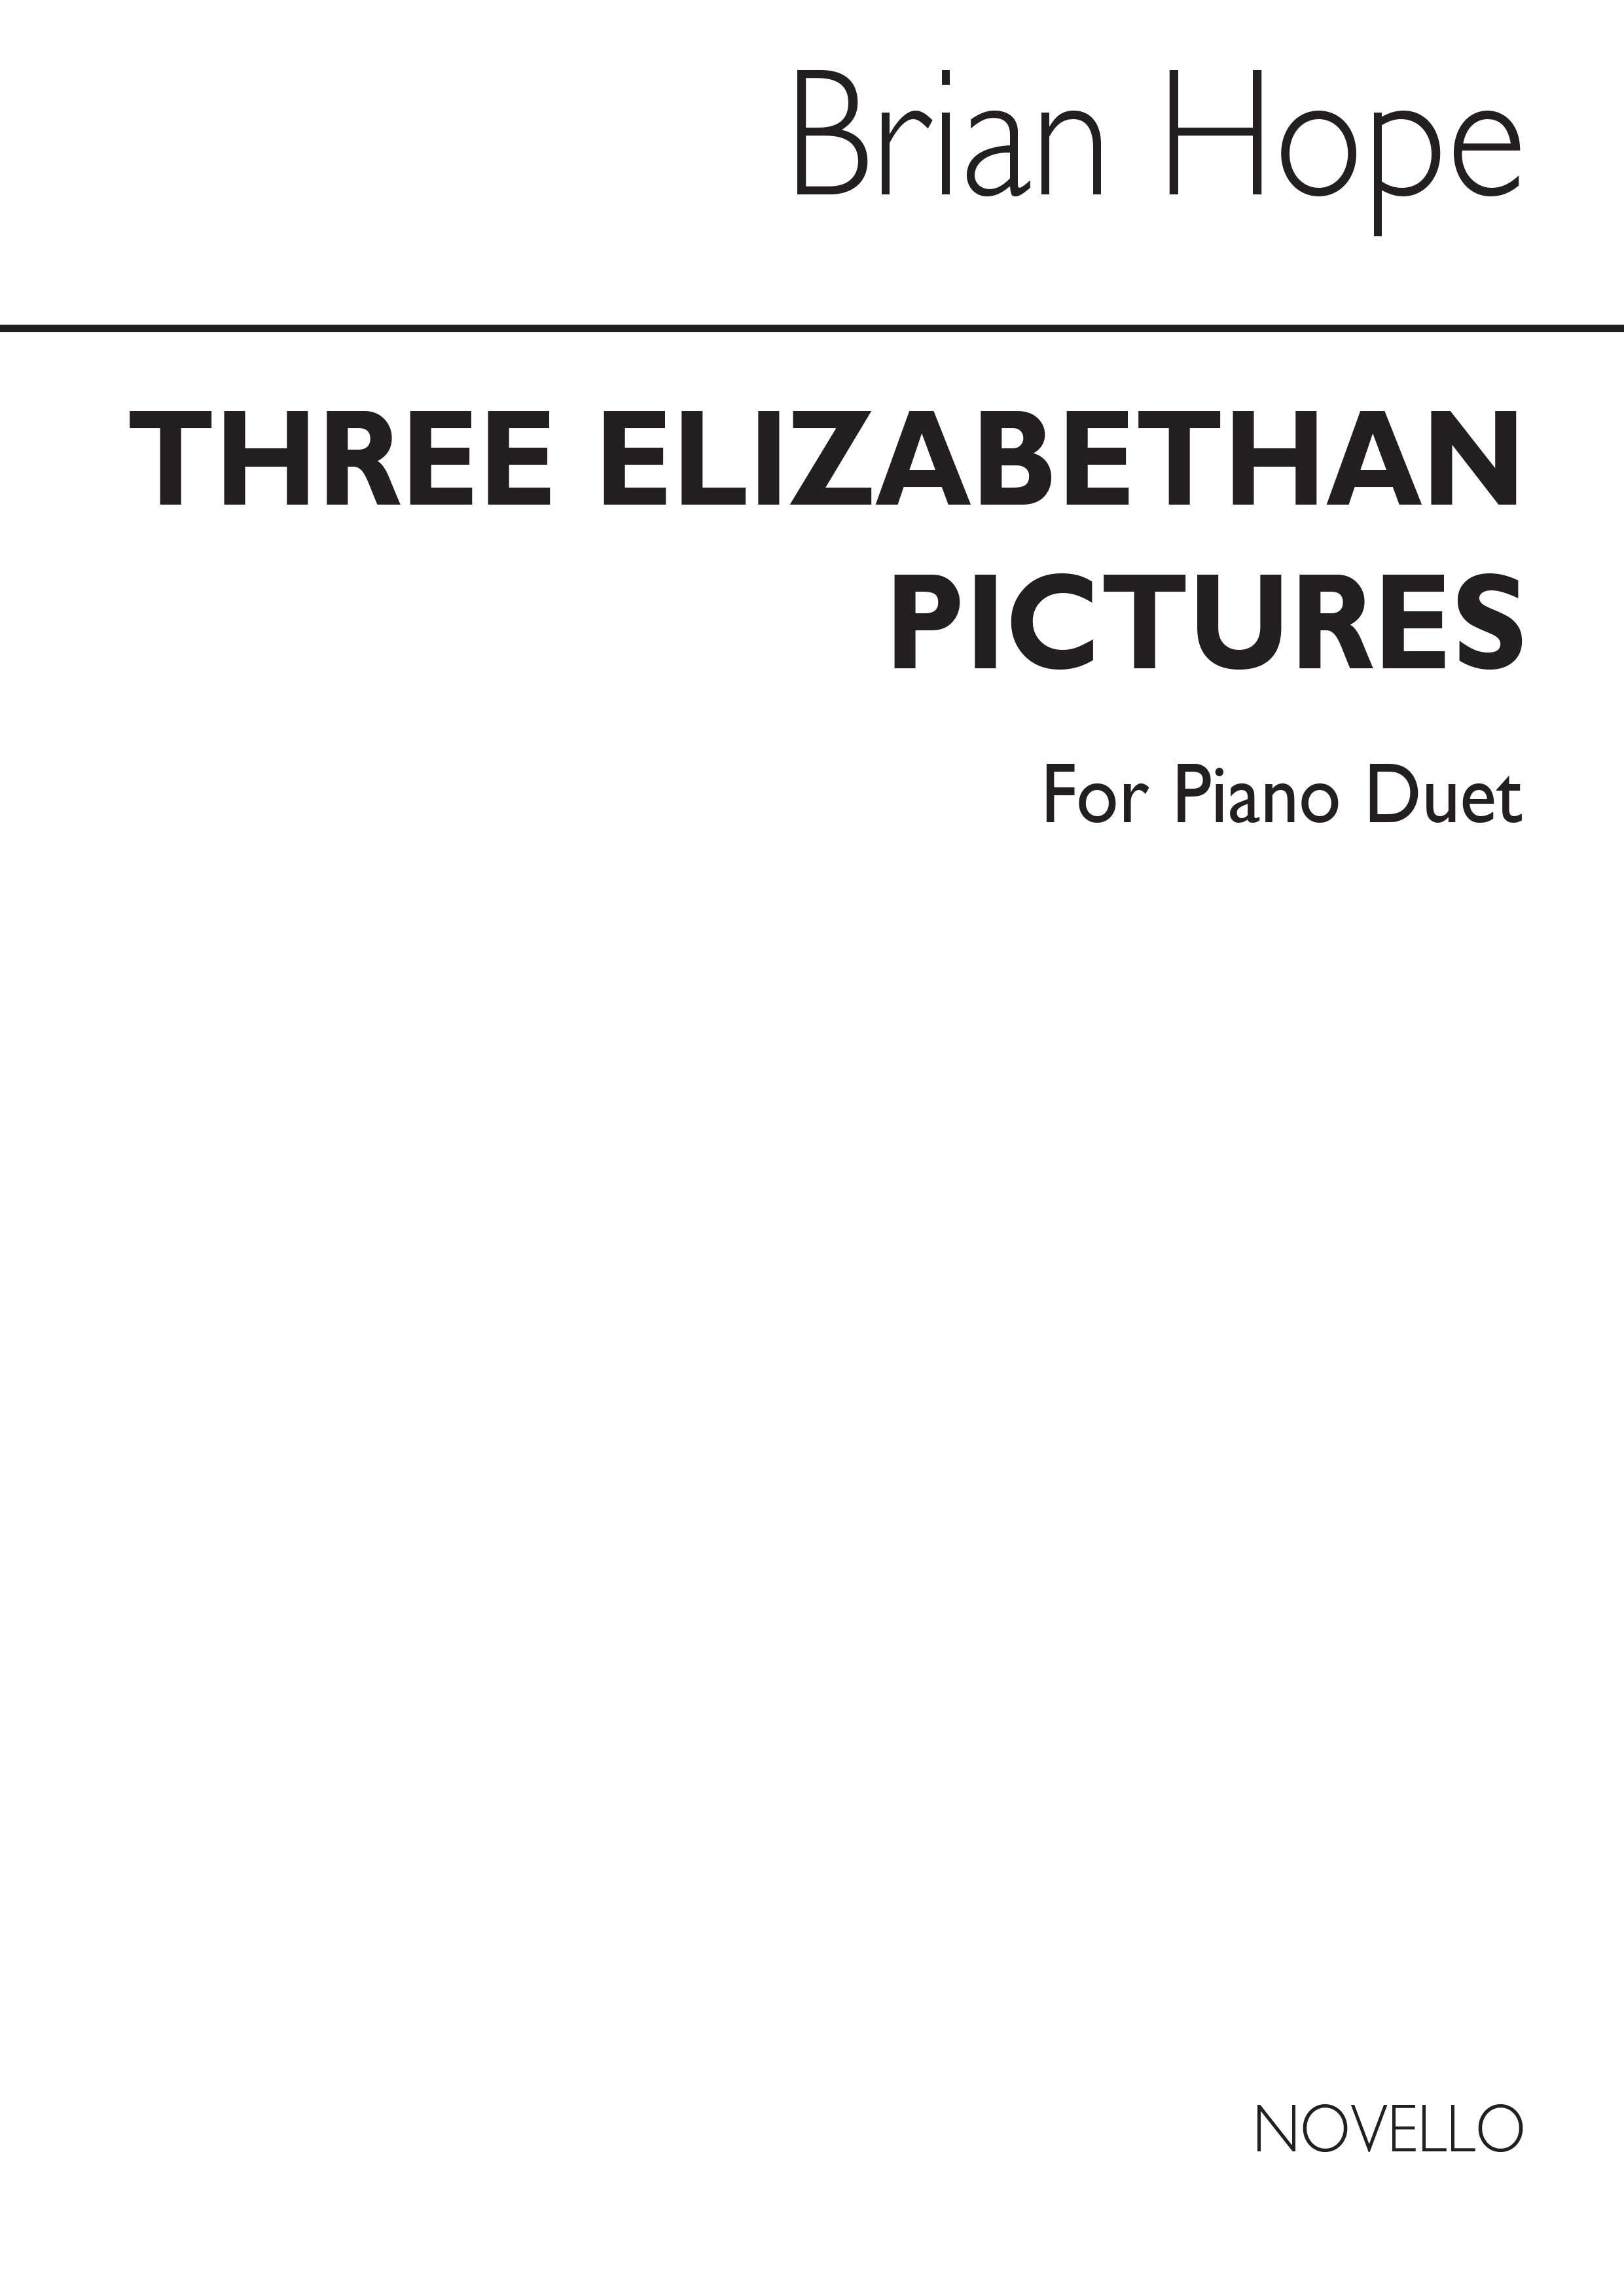 Brian Hope: Three Elizabethan Pictures